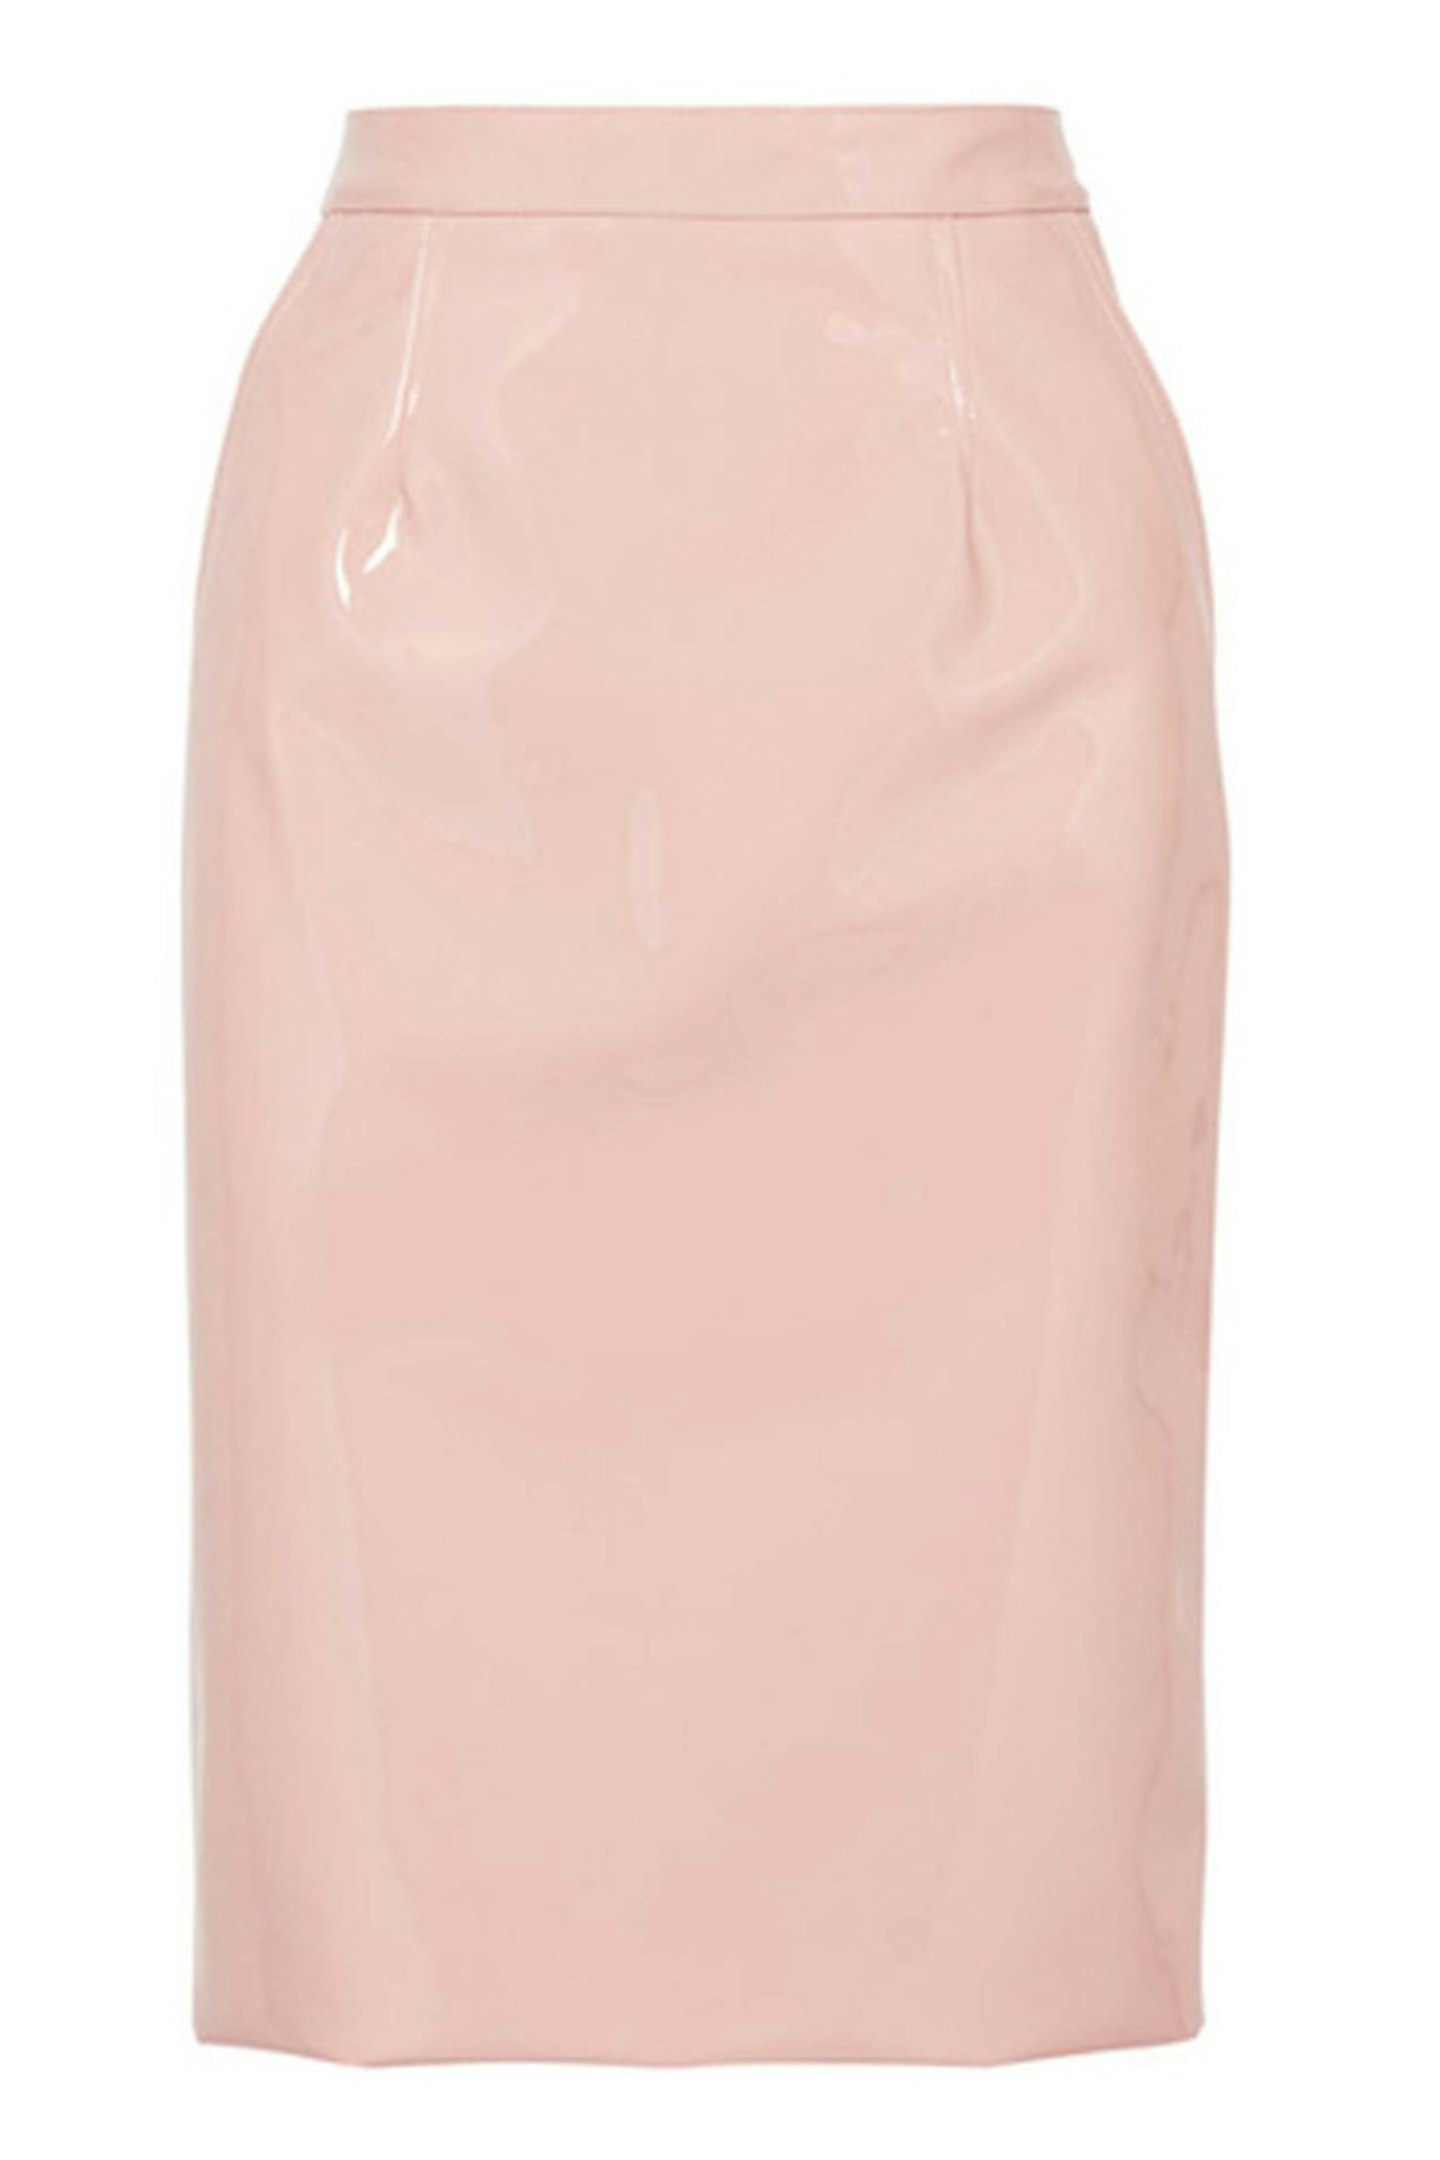 1. Pink patent skirt, £400, Marc by Marc Jacobs at Net-A-Porter